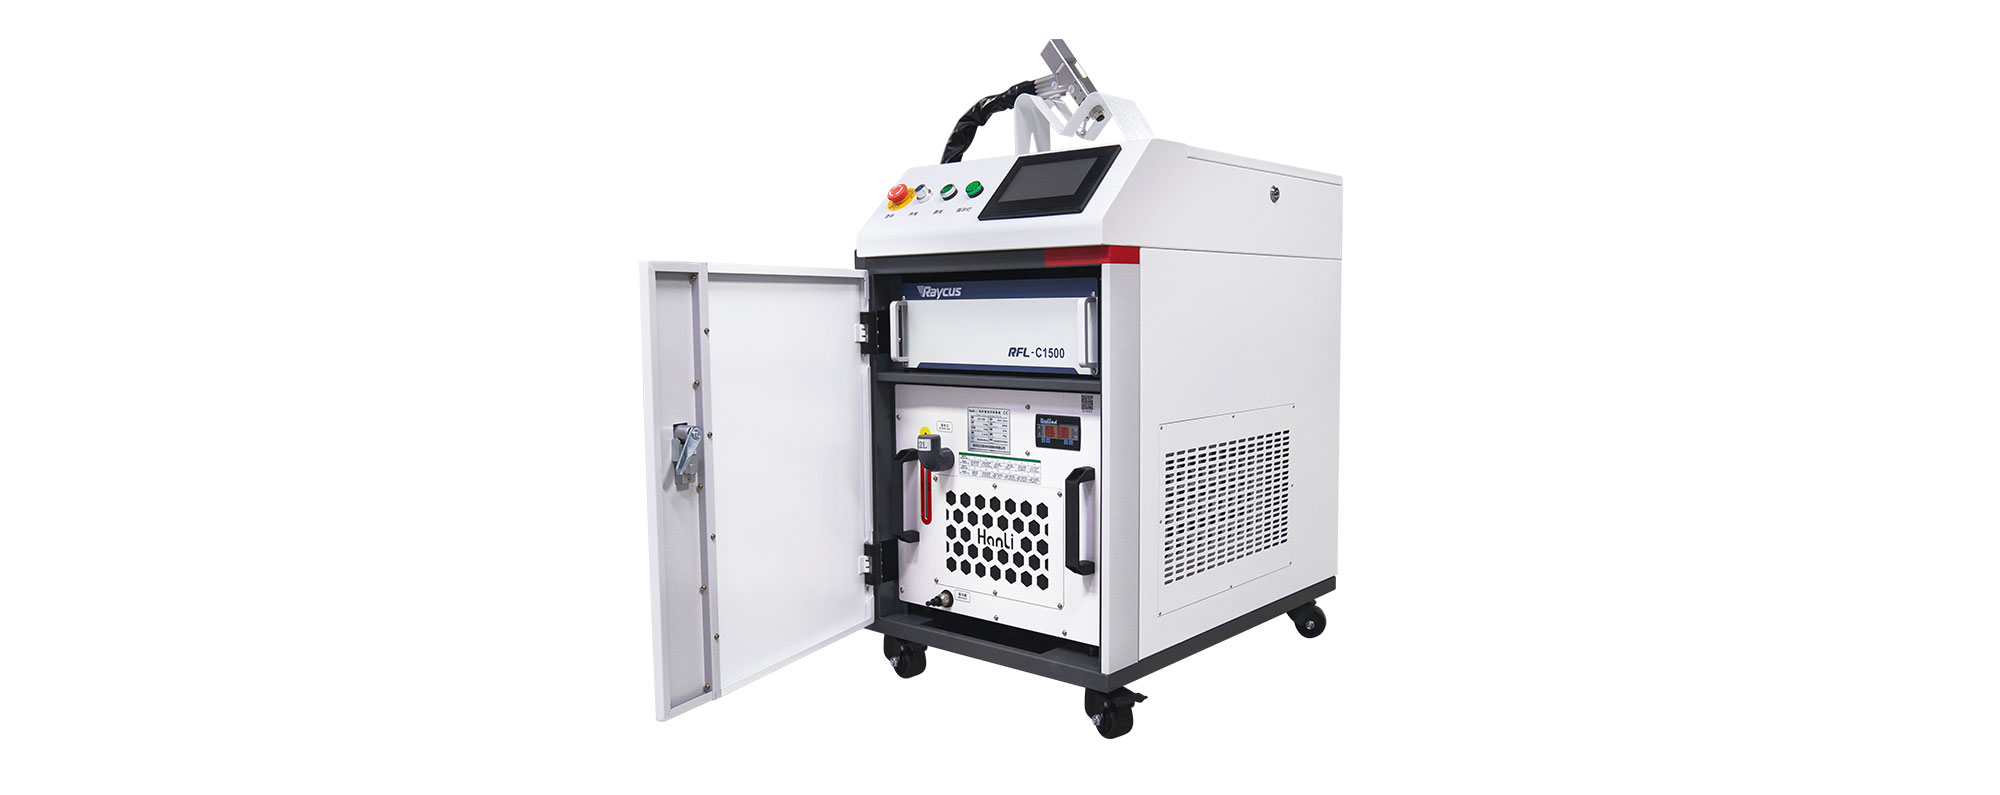 Good price and quality Plate and tube integrated laser cutting machine selection is very important